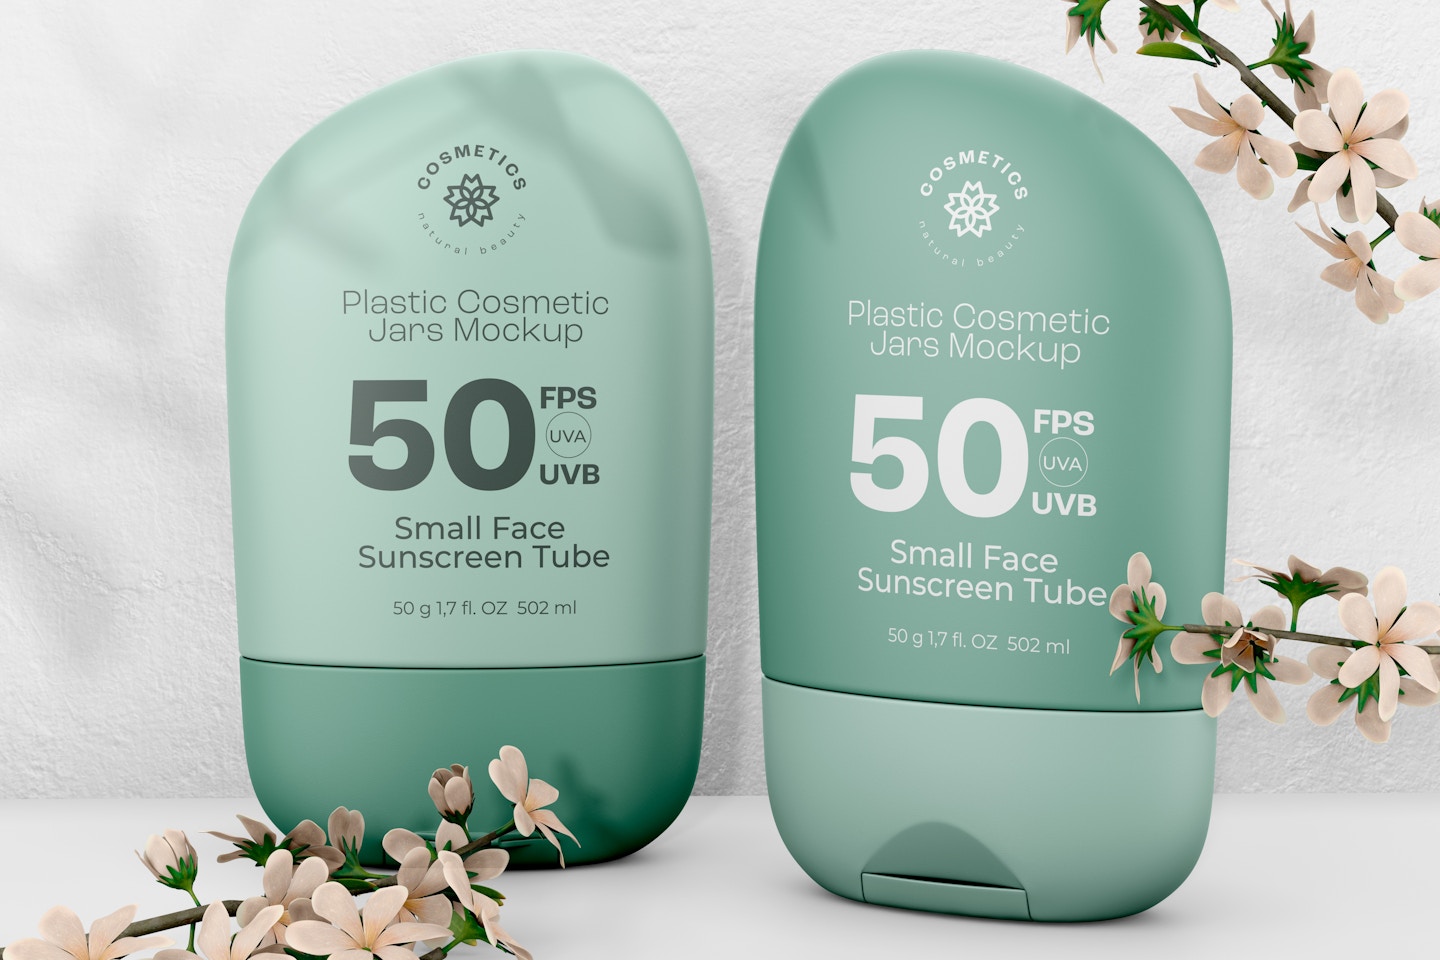 Small Face Sunscreen Tubes Mockup, Side and Front View